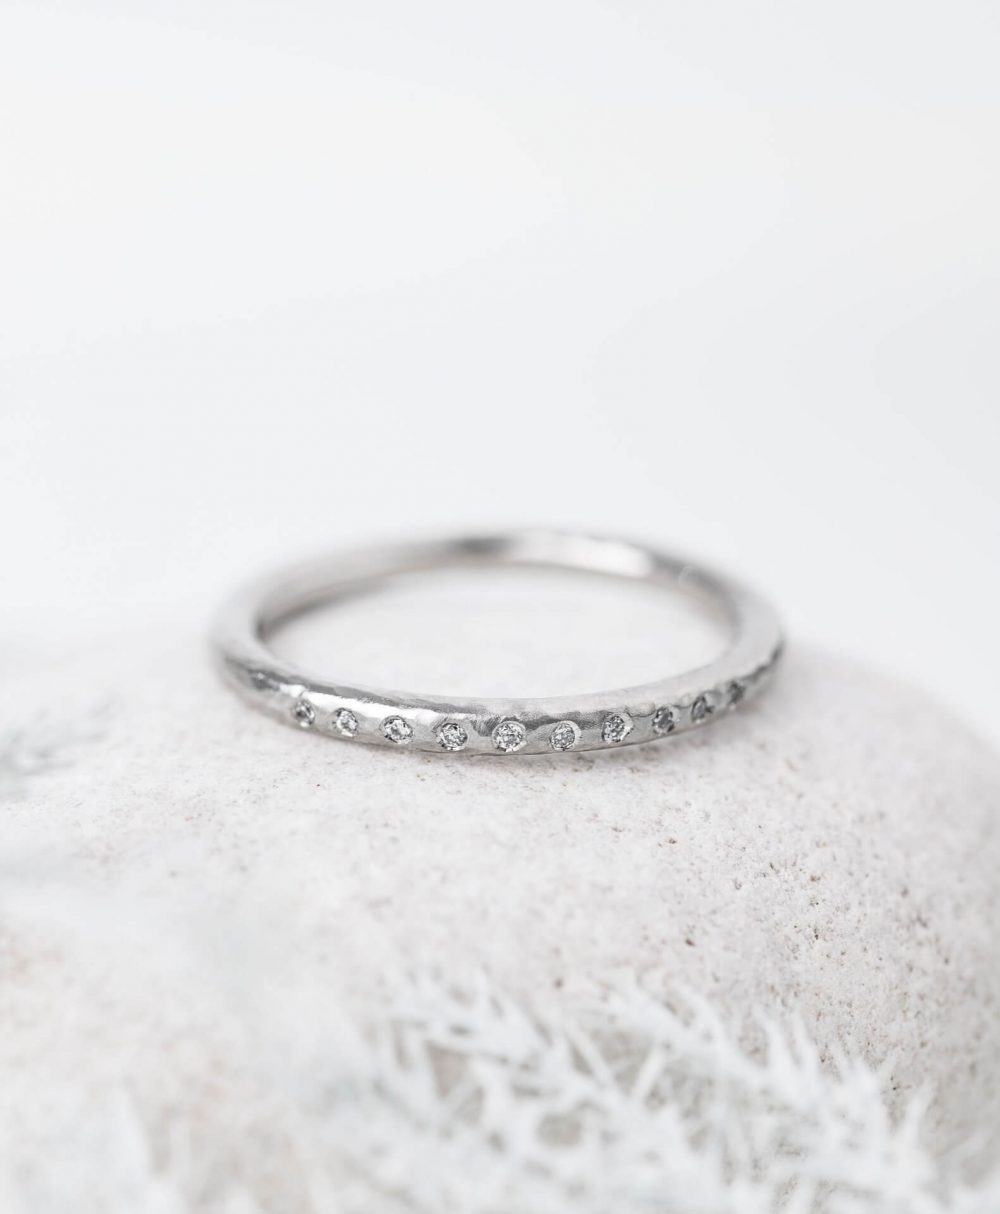 Hammered Diamond Wedding Ring Handmade In Platinum And Set With Ten Sparkle Diamonds, Pictured On Pebble. Designed By Bristol Jeweller Jacks Turner.